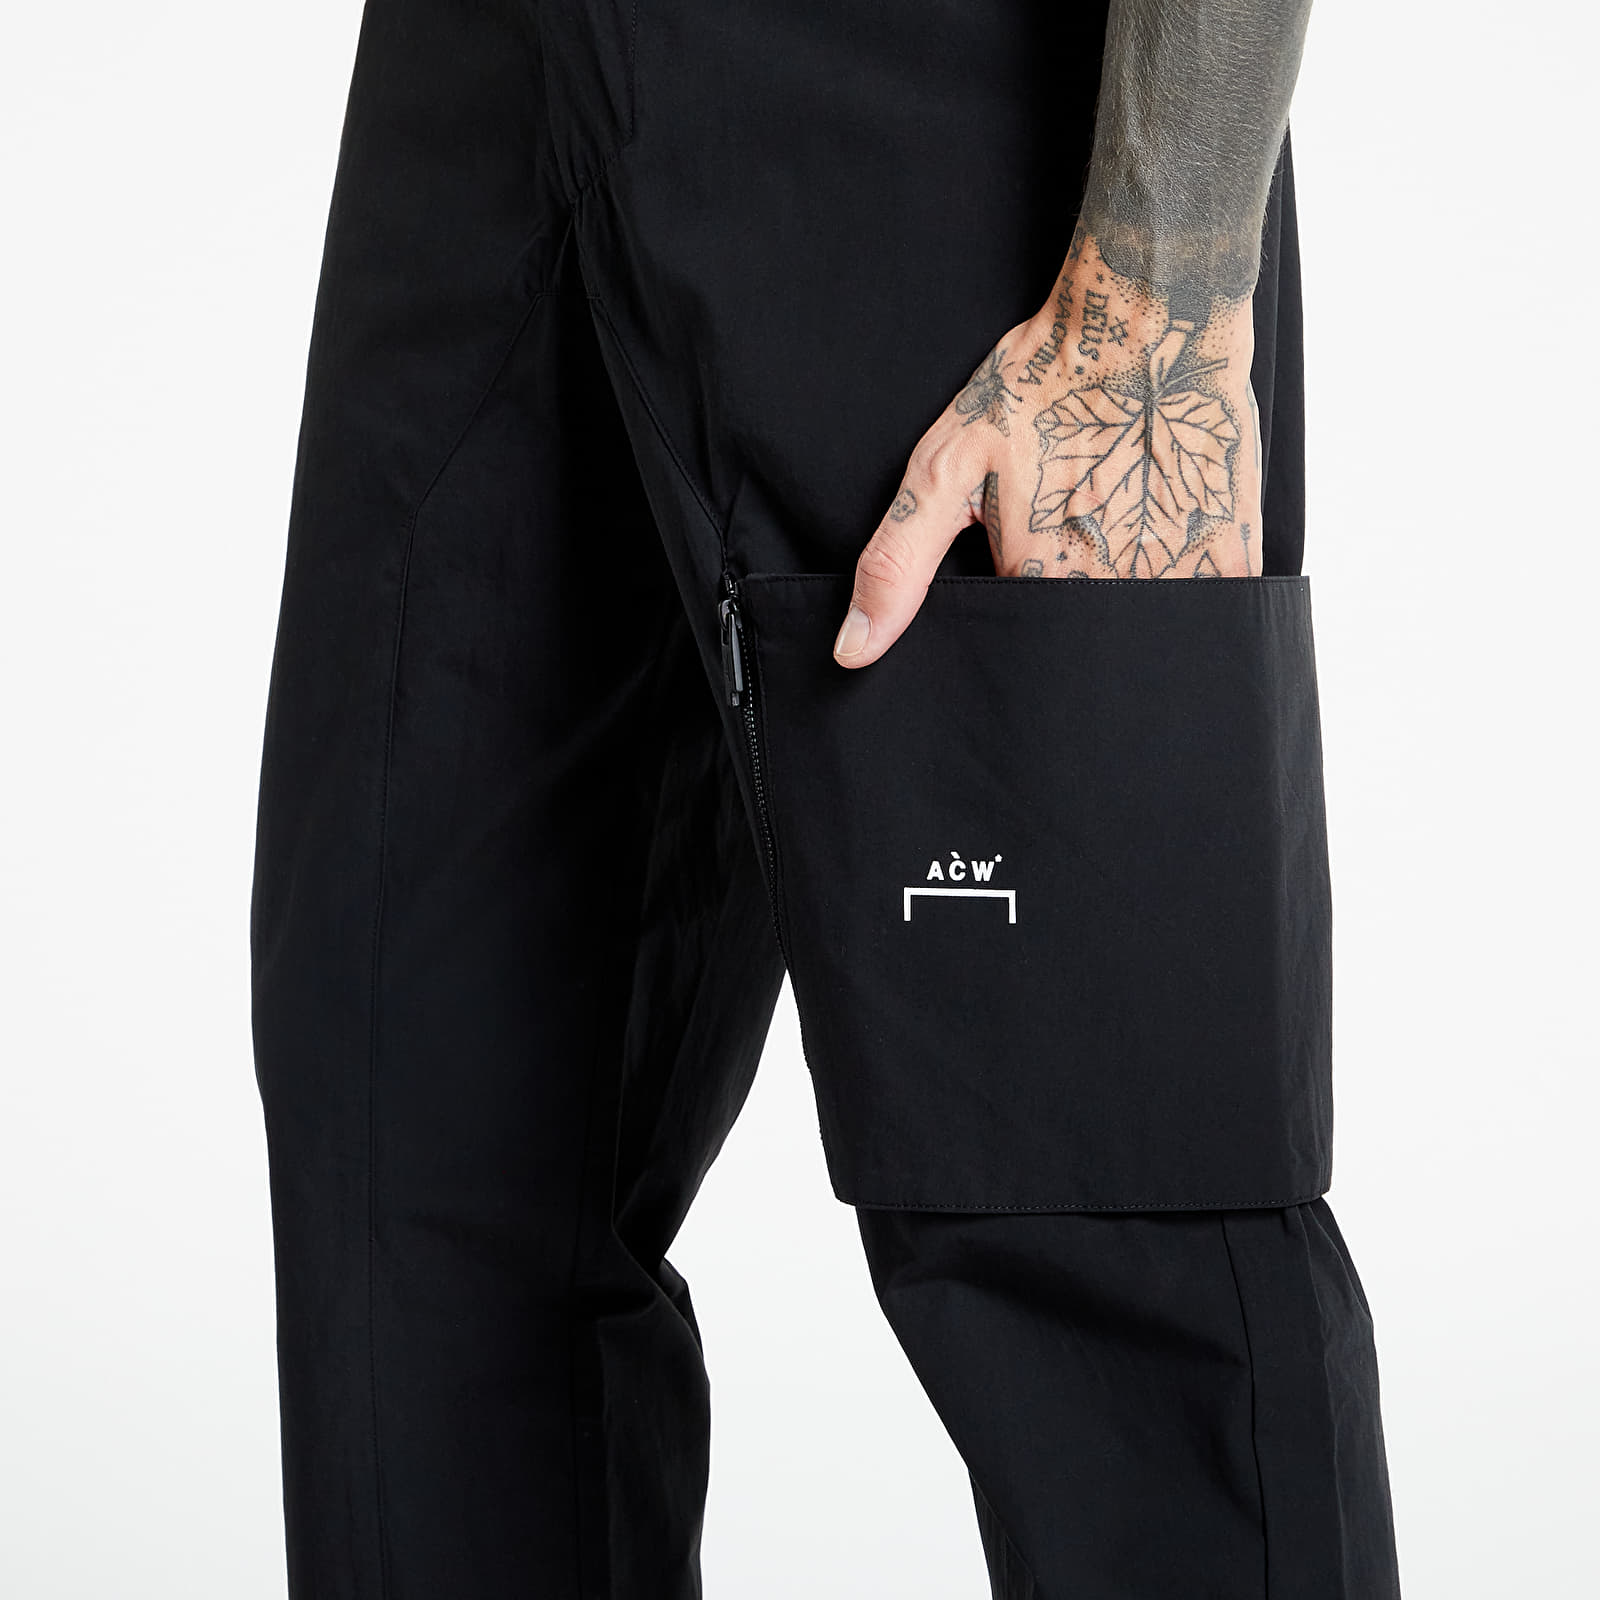 A-COLD WALL* Sweatpant Top Quality A COLD WALL Trousers Men's Women's 1:1  High